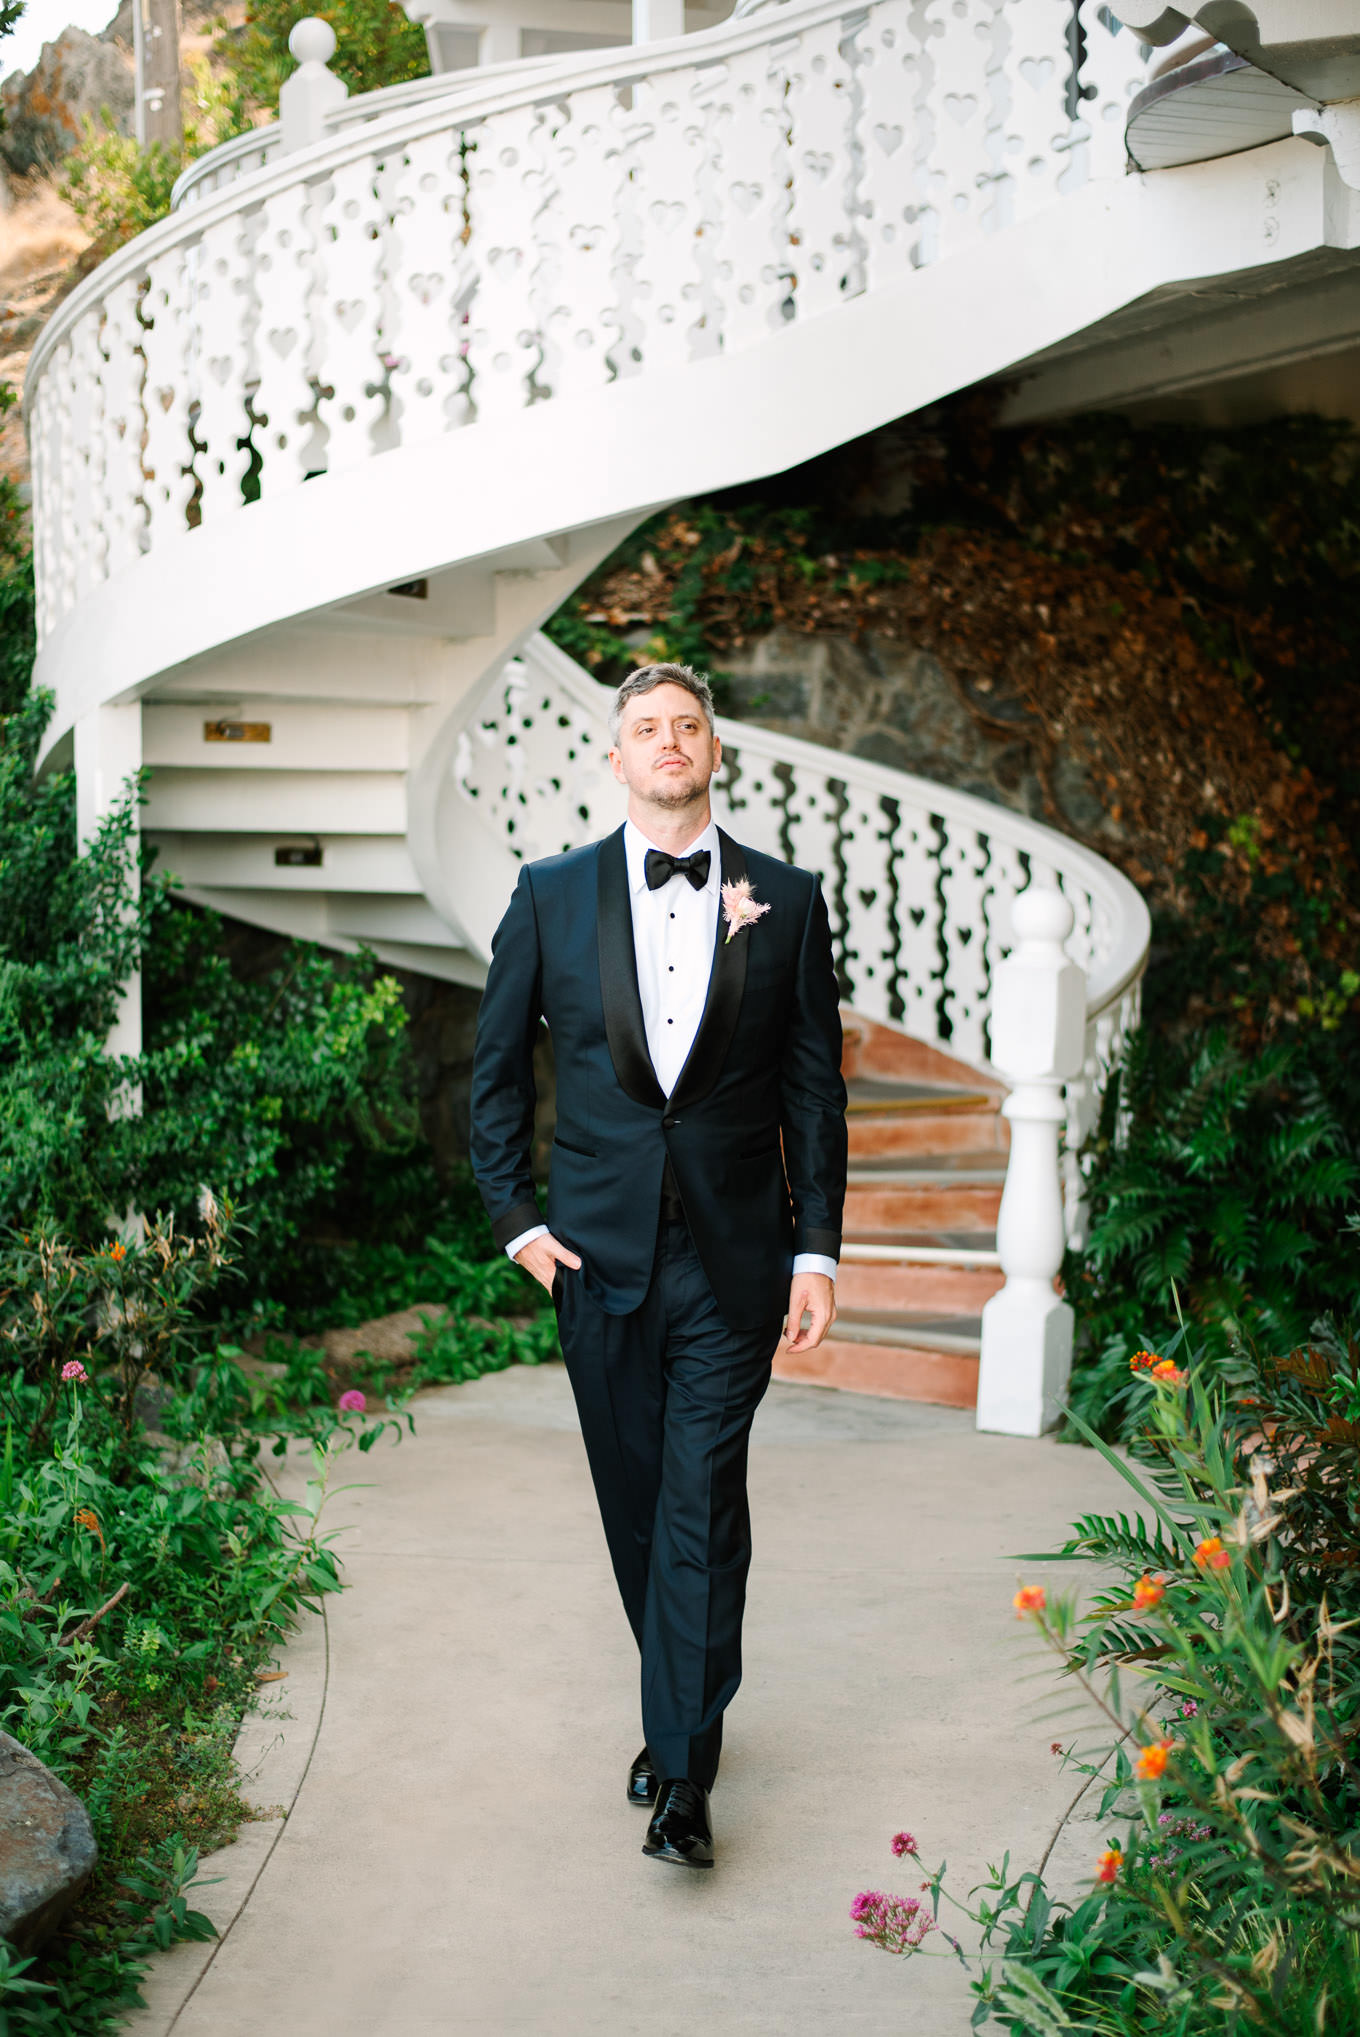 Groom in Tom Ford tuxedo | Colorful and quirky wedding at Higuera Ranch in San Luis Obispo | #sanluisobispowedding #californiawedding #higueraranch #madonnainn   
Source: Mary Costa Photography | Los Angeles